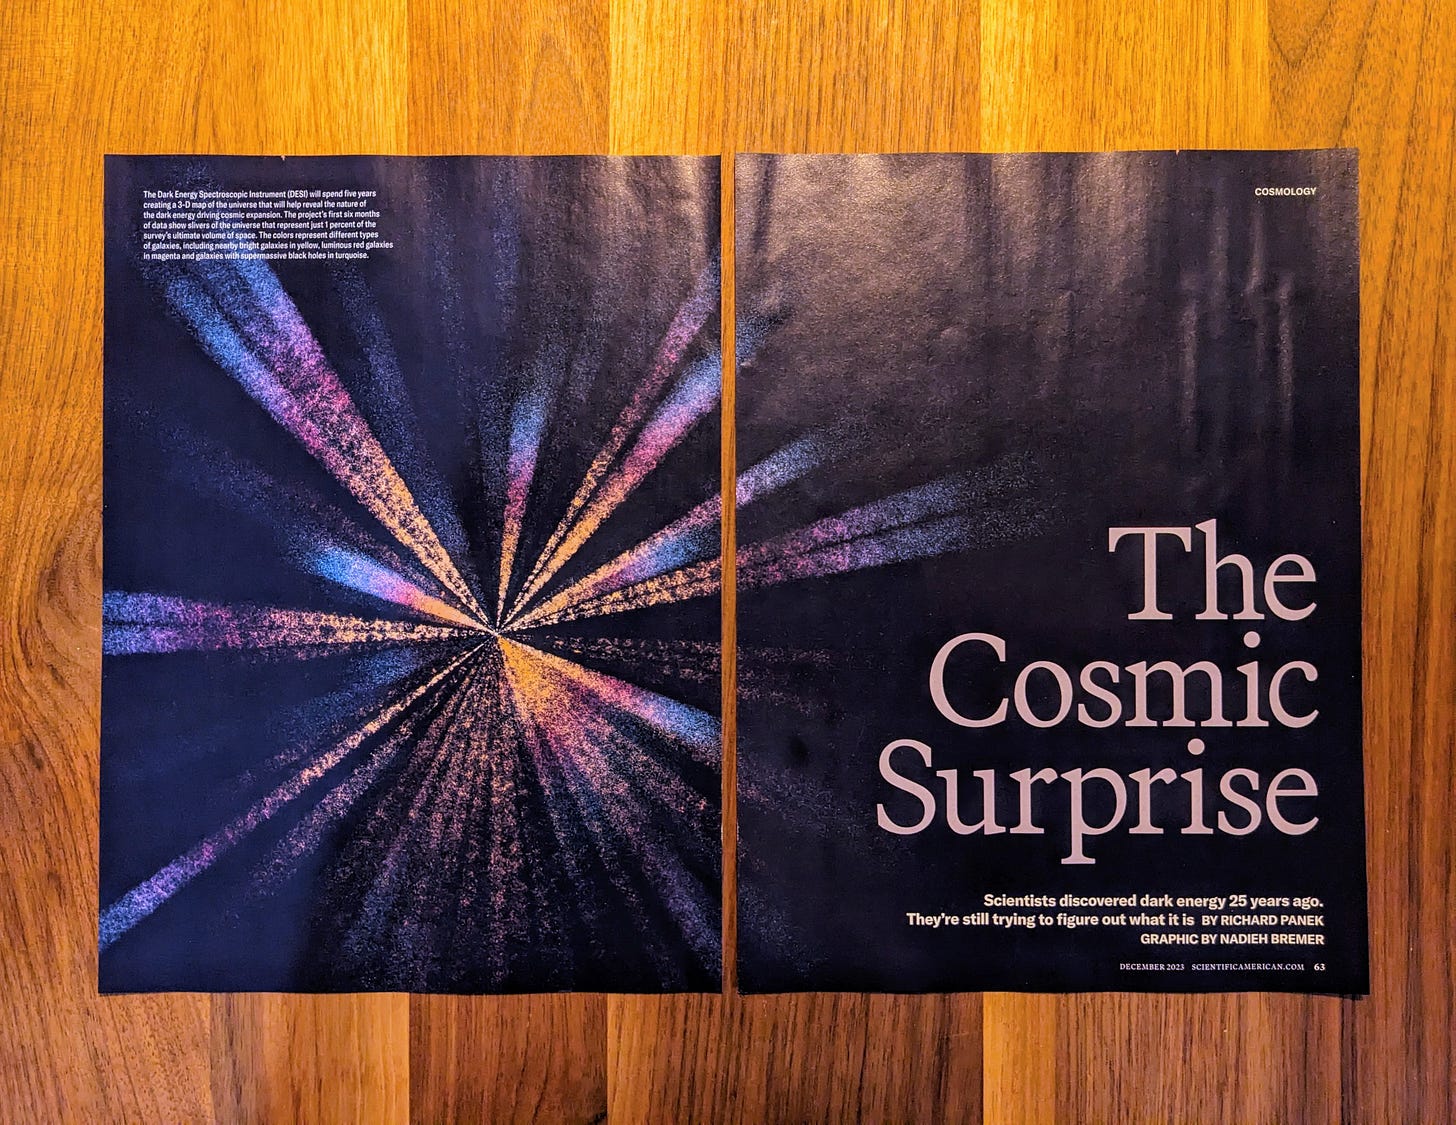 The cover for the article on dark energy for Scientific American